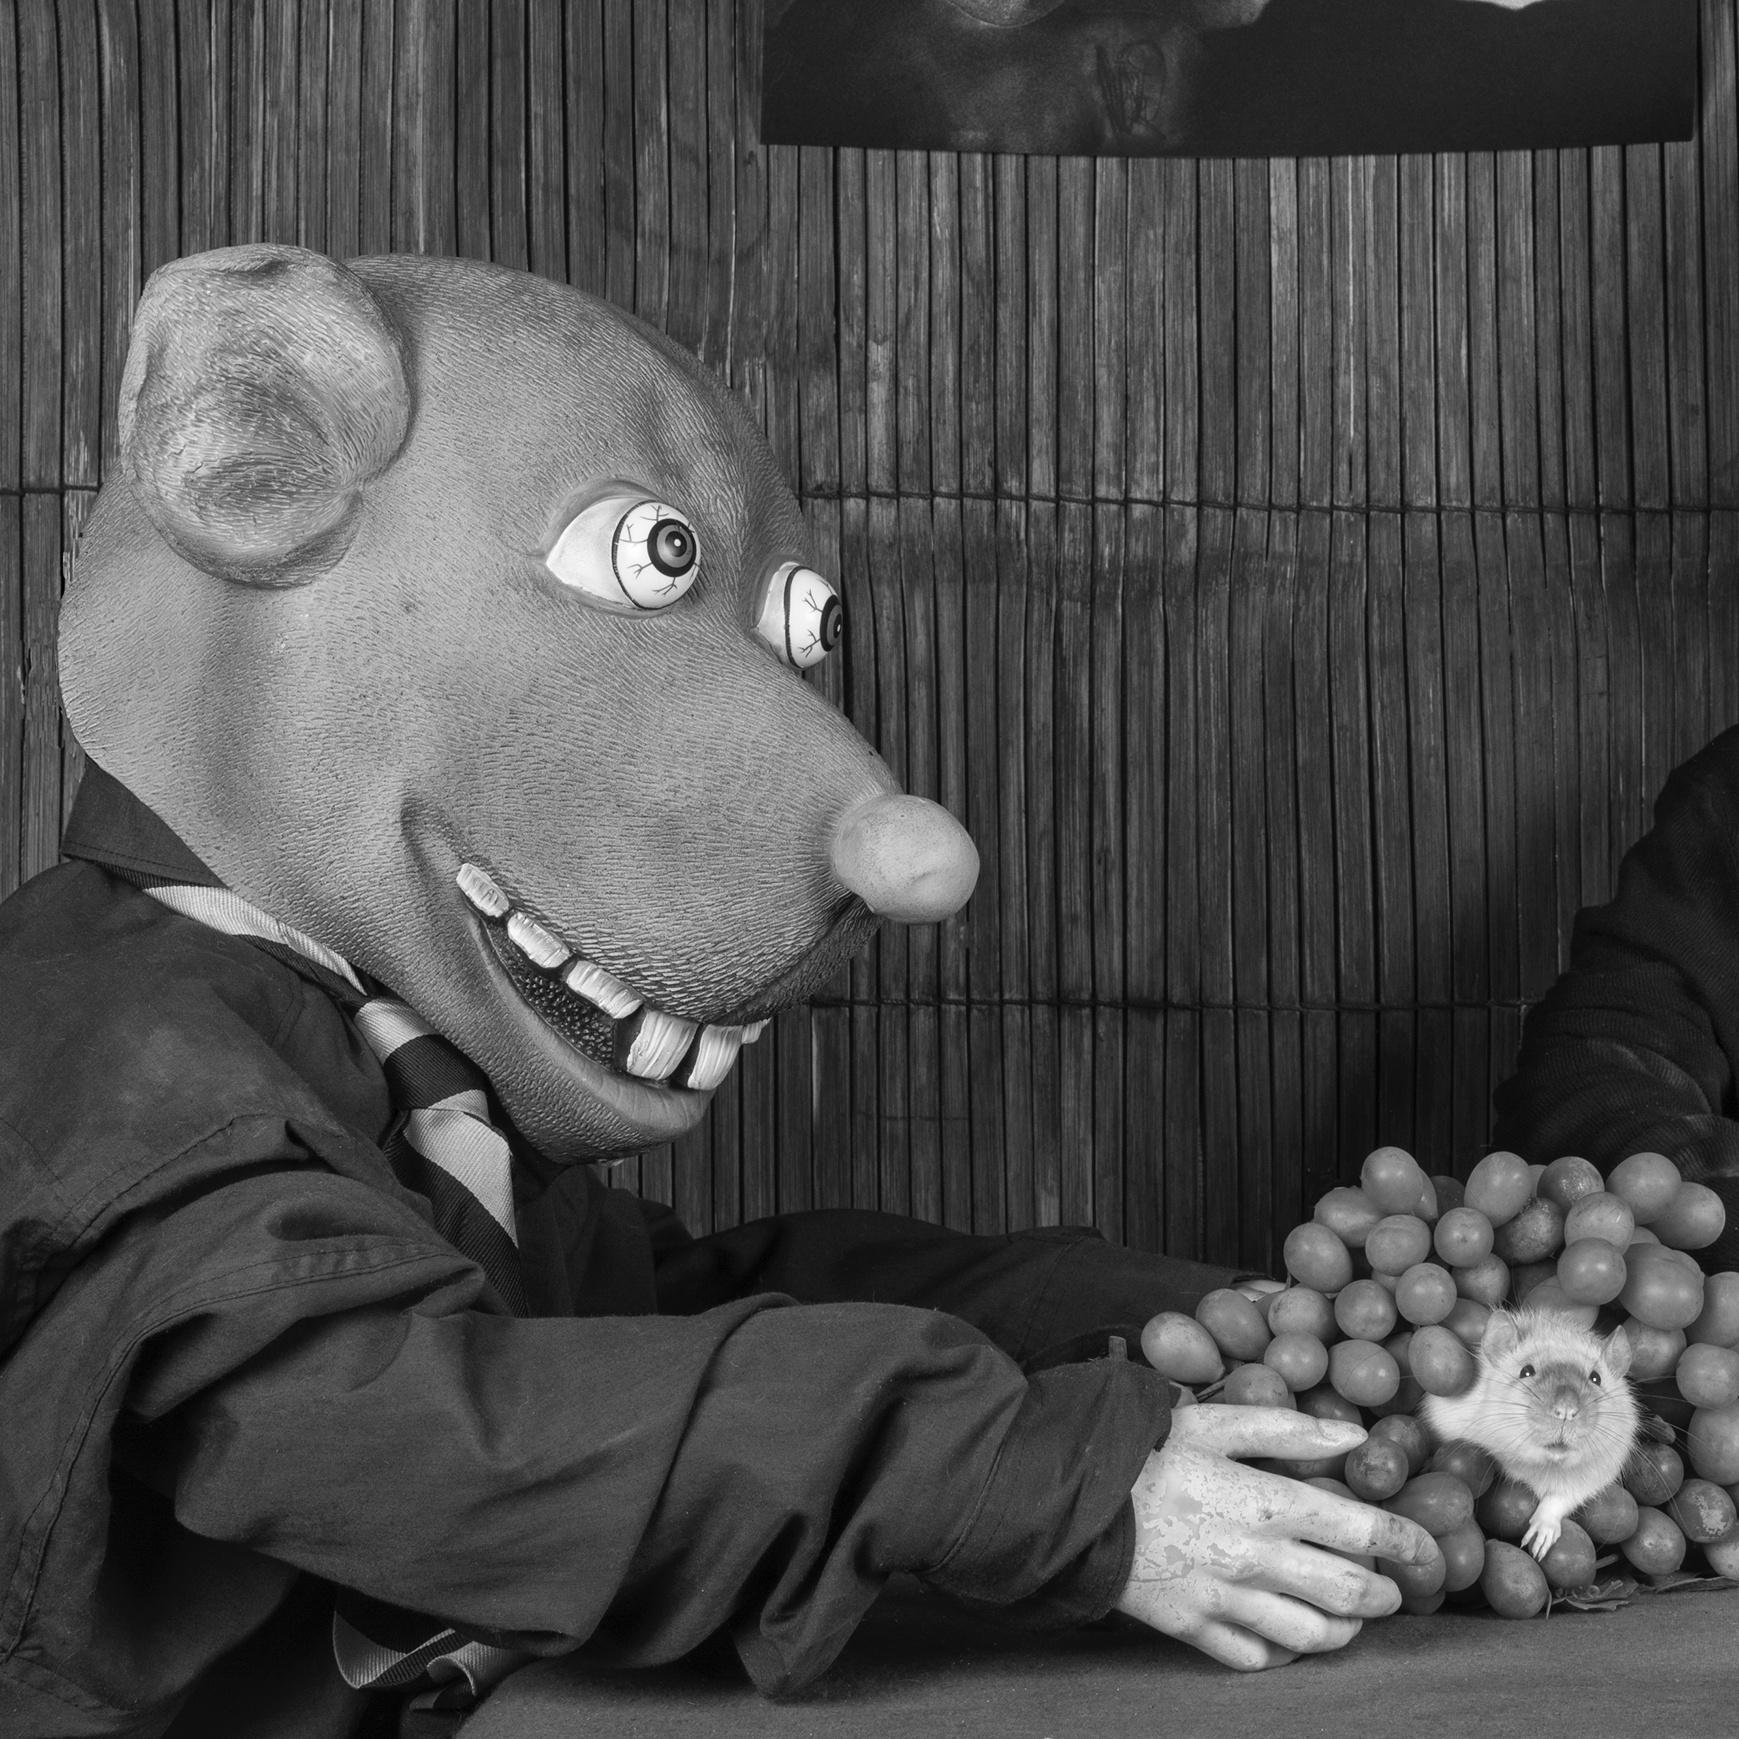 Roger BALLEN (*1950, America/South Africa)
Sour Grapes, 2020
Archival pigment print
43 x 61 cm (16 7/8 x 24 in.)
Edition of 9, plus 2 AP; Ed. no. 2/9
Print only

– Roger the Rat

Surreal, refined, disturbing: Roger Ballen has made a name for himself